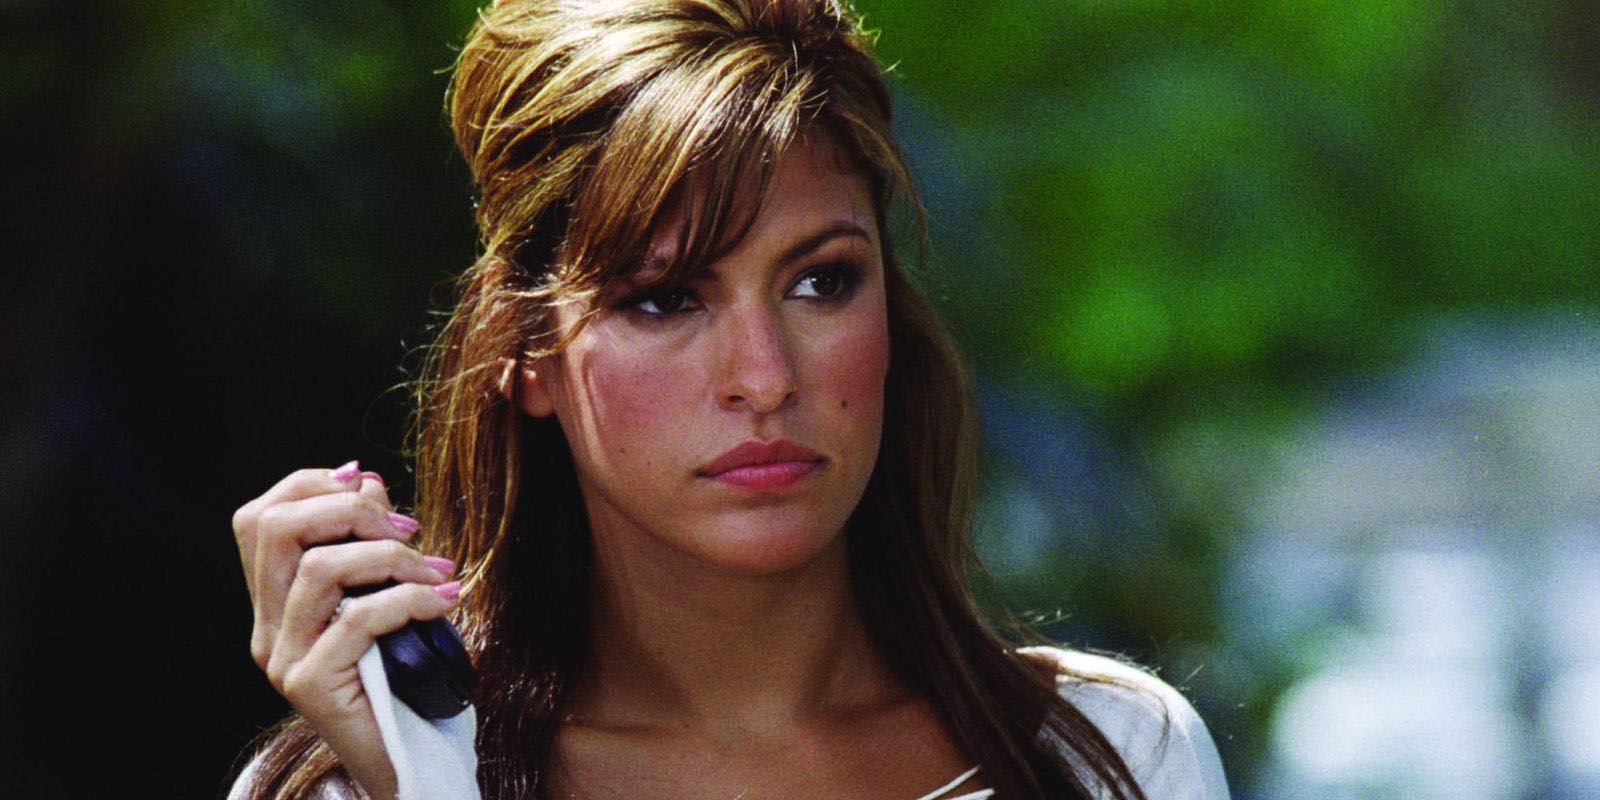 Eva Mendes holds a pager in Fast and Furious